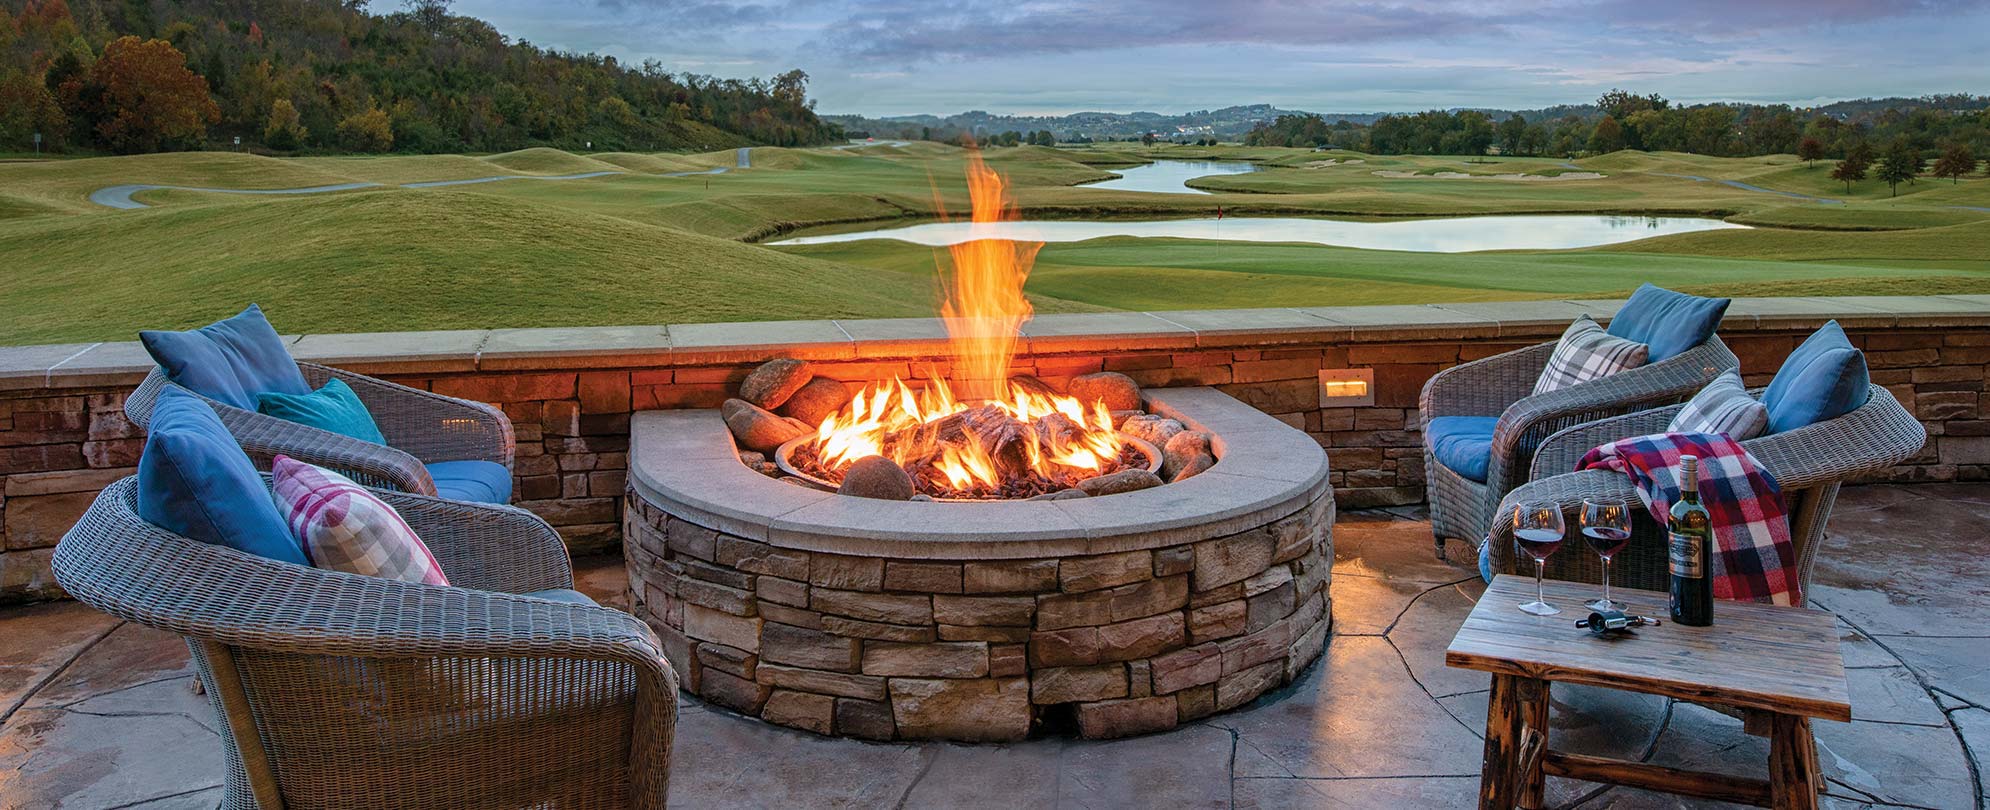 Chairs and wine surround a fire pit overlooking the golf course at Club Wyndham Great Smokies Lodge in Sevierville, Tennessee